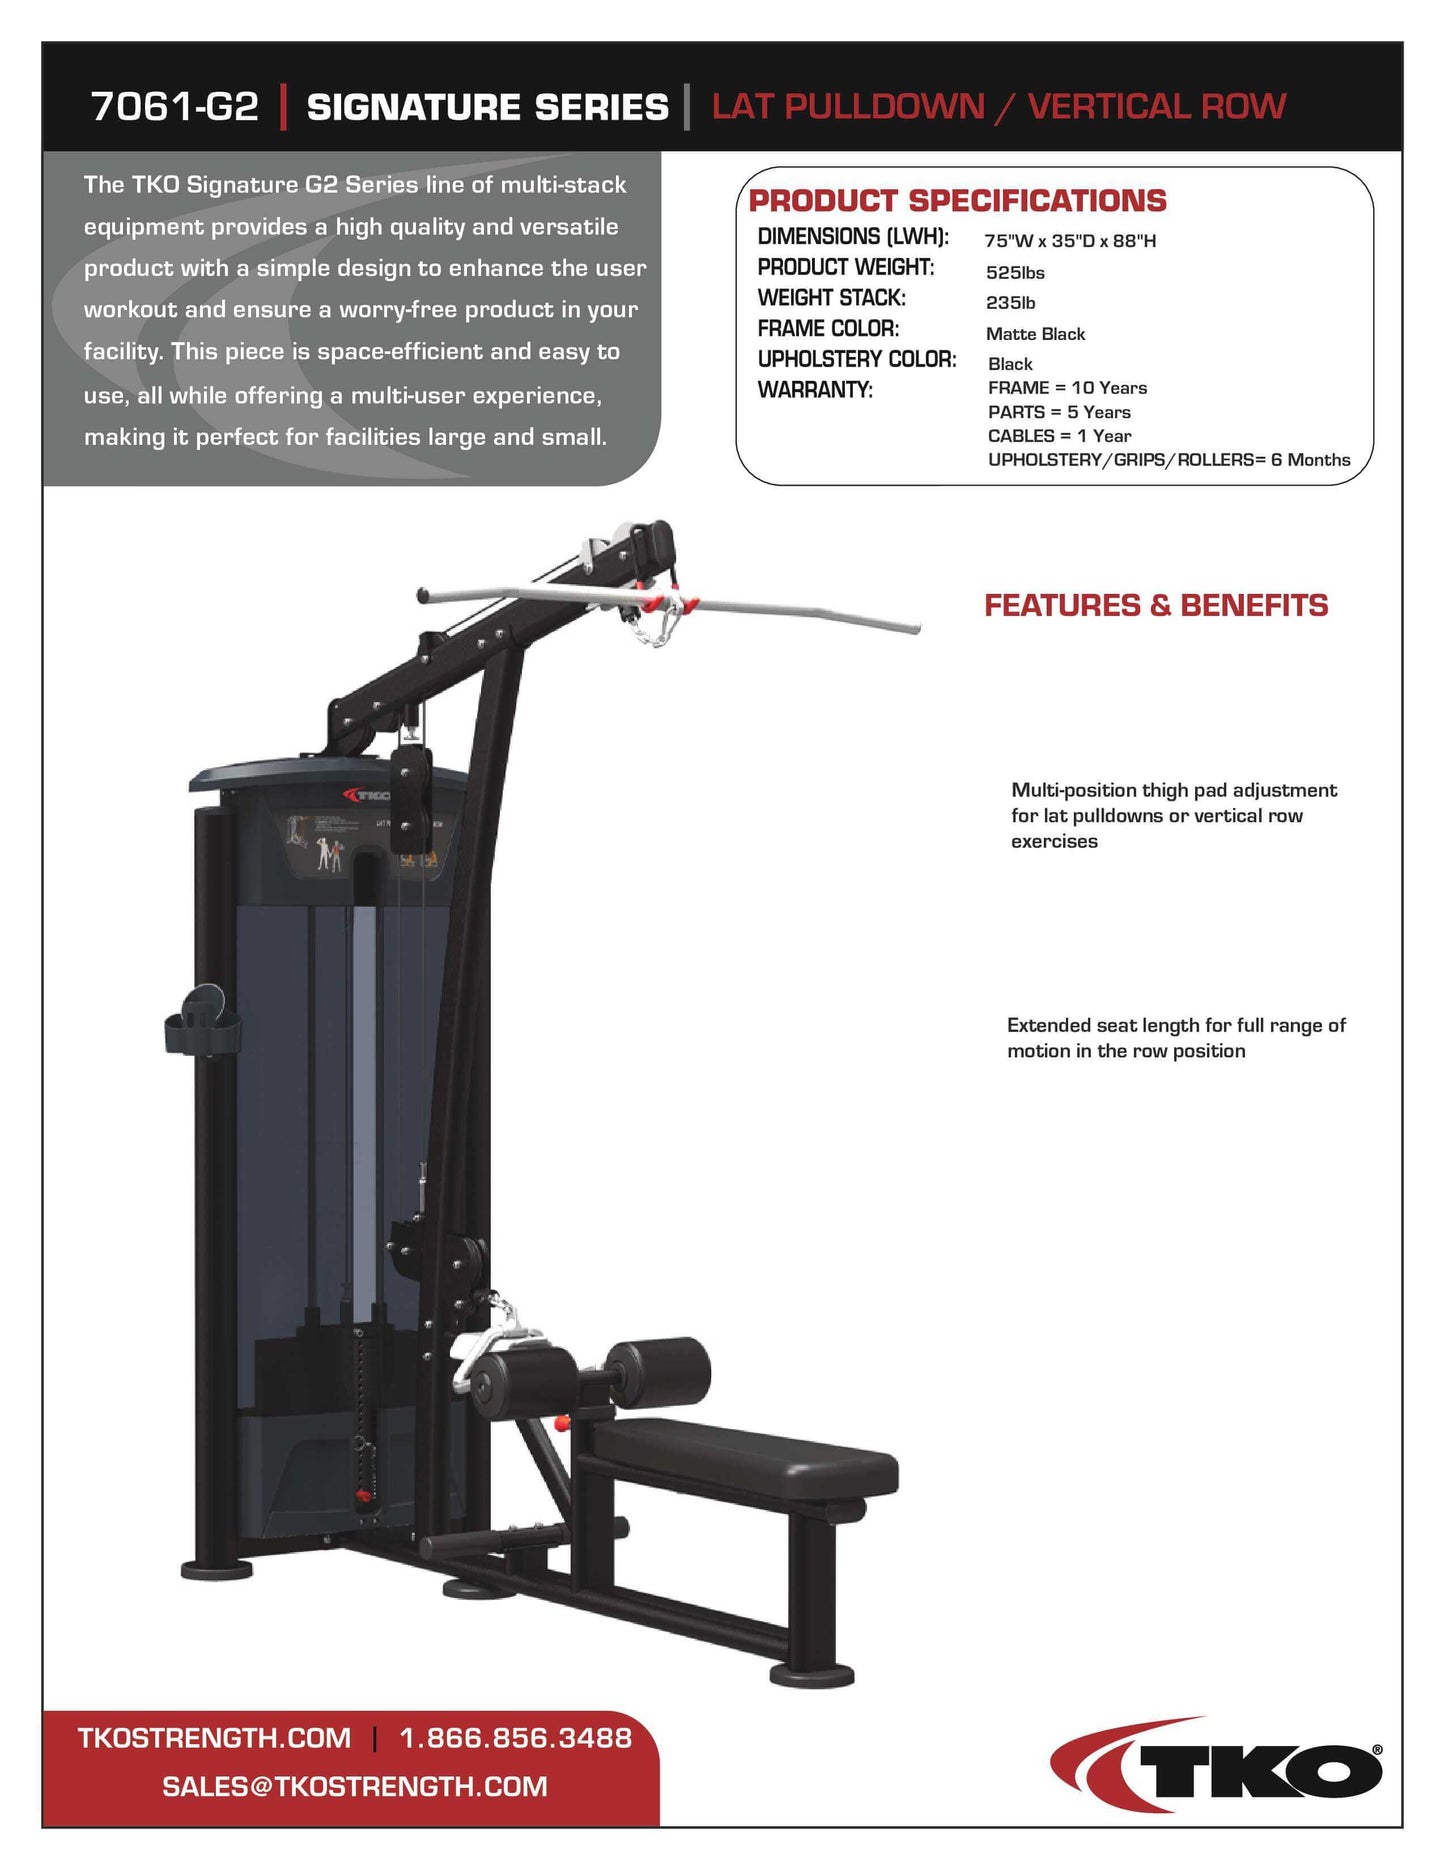 TKO Signature Lat Pulldown / Vertical Row Machine 235 lb Weight Stack